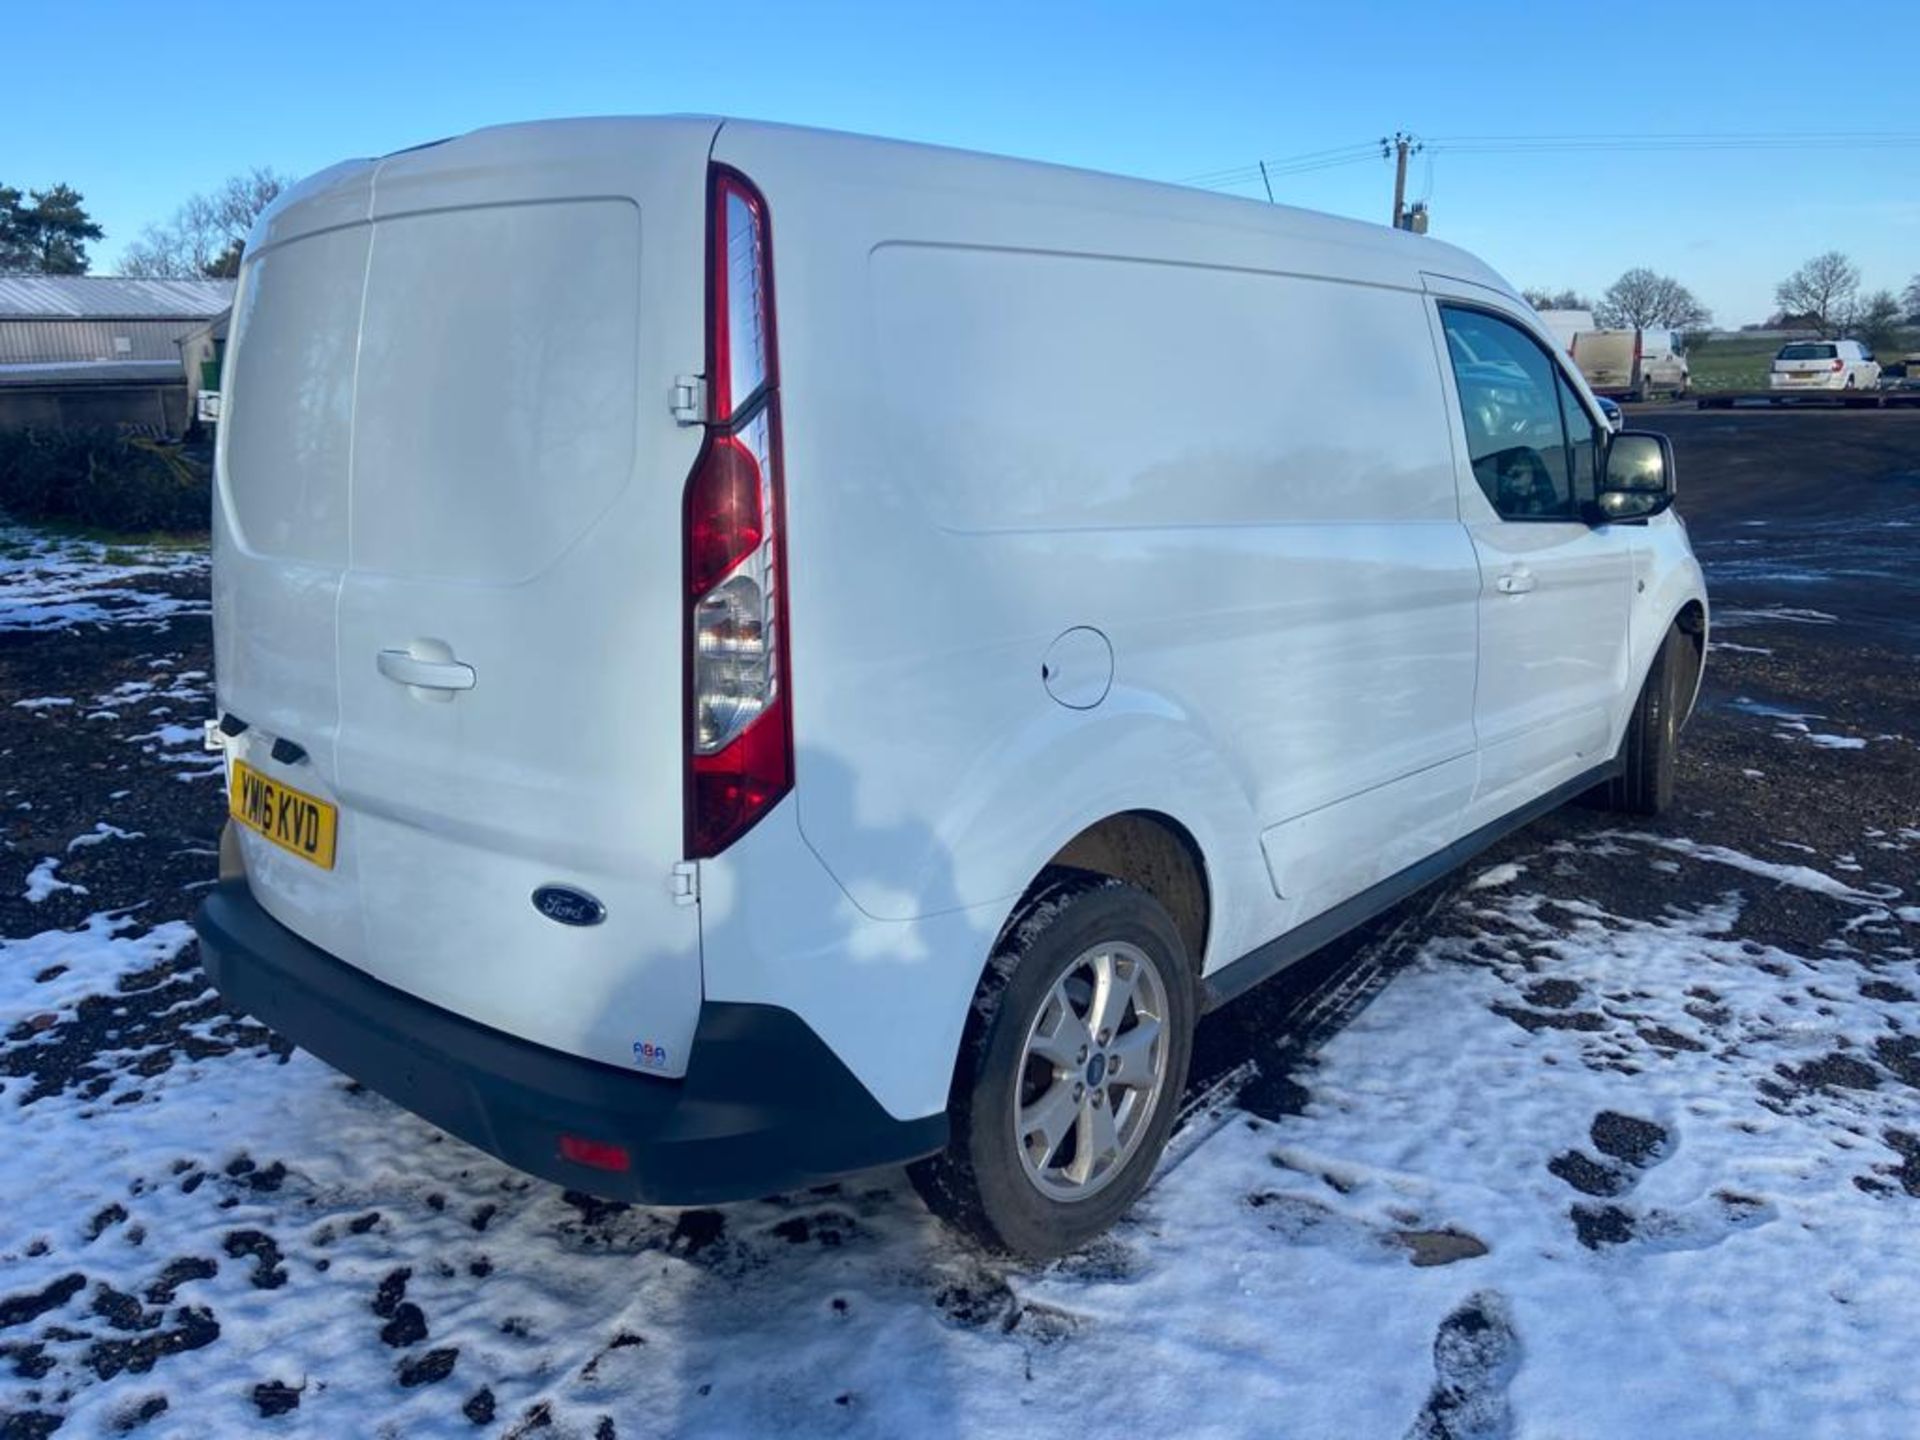 2016/16 REG FORD TRANSIT CONNECT 240 LIMITED 1.5 DIESEL LWB PANEL VAN, SHOWING 2 FORMER KEEPERS - Image 8 of 12